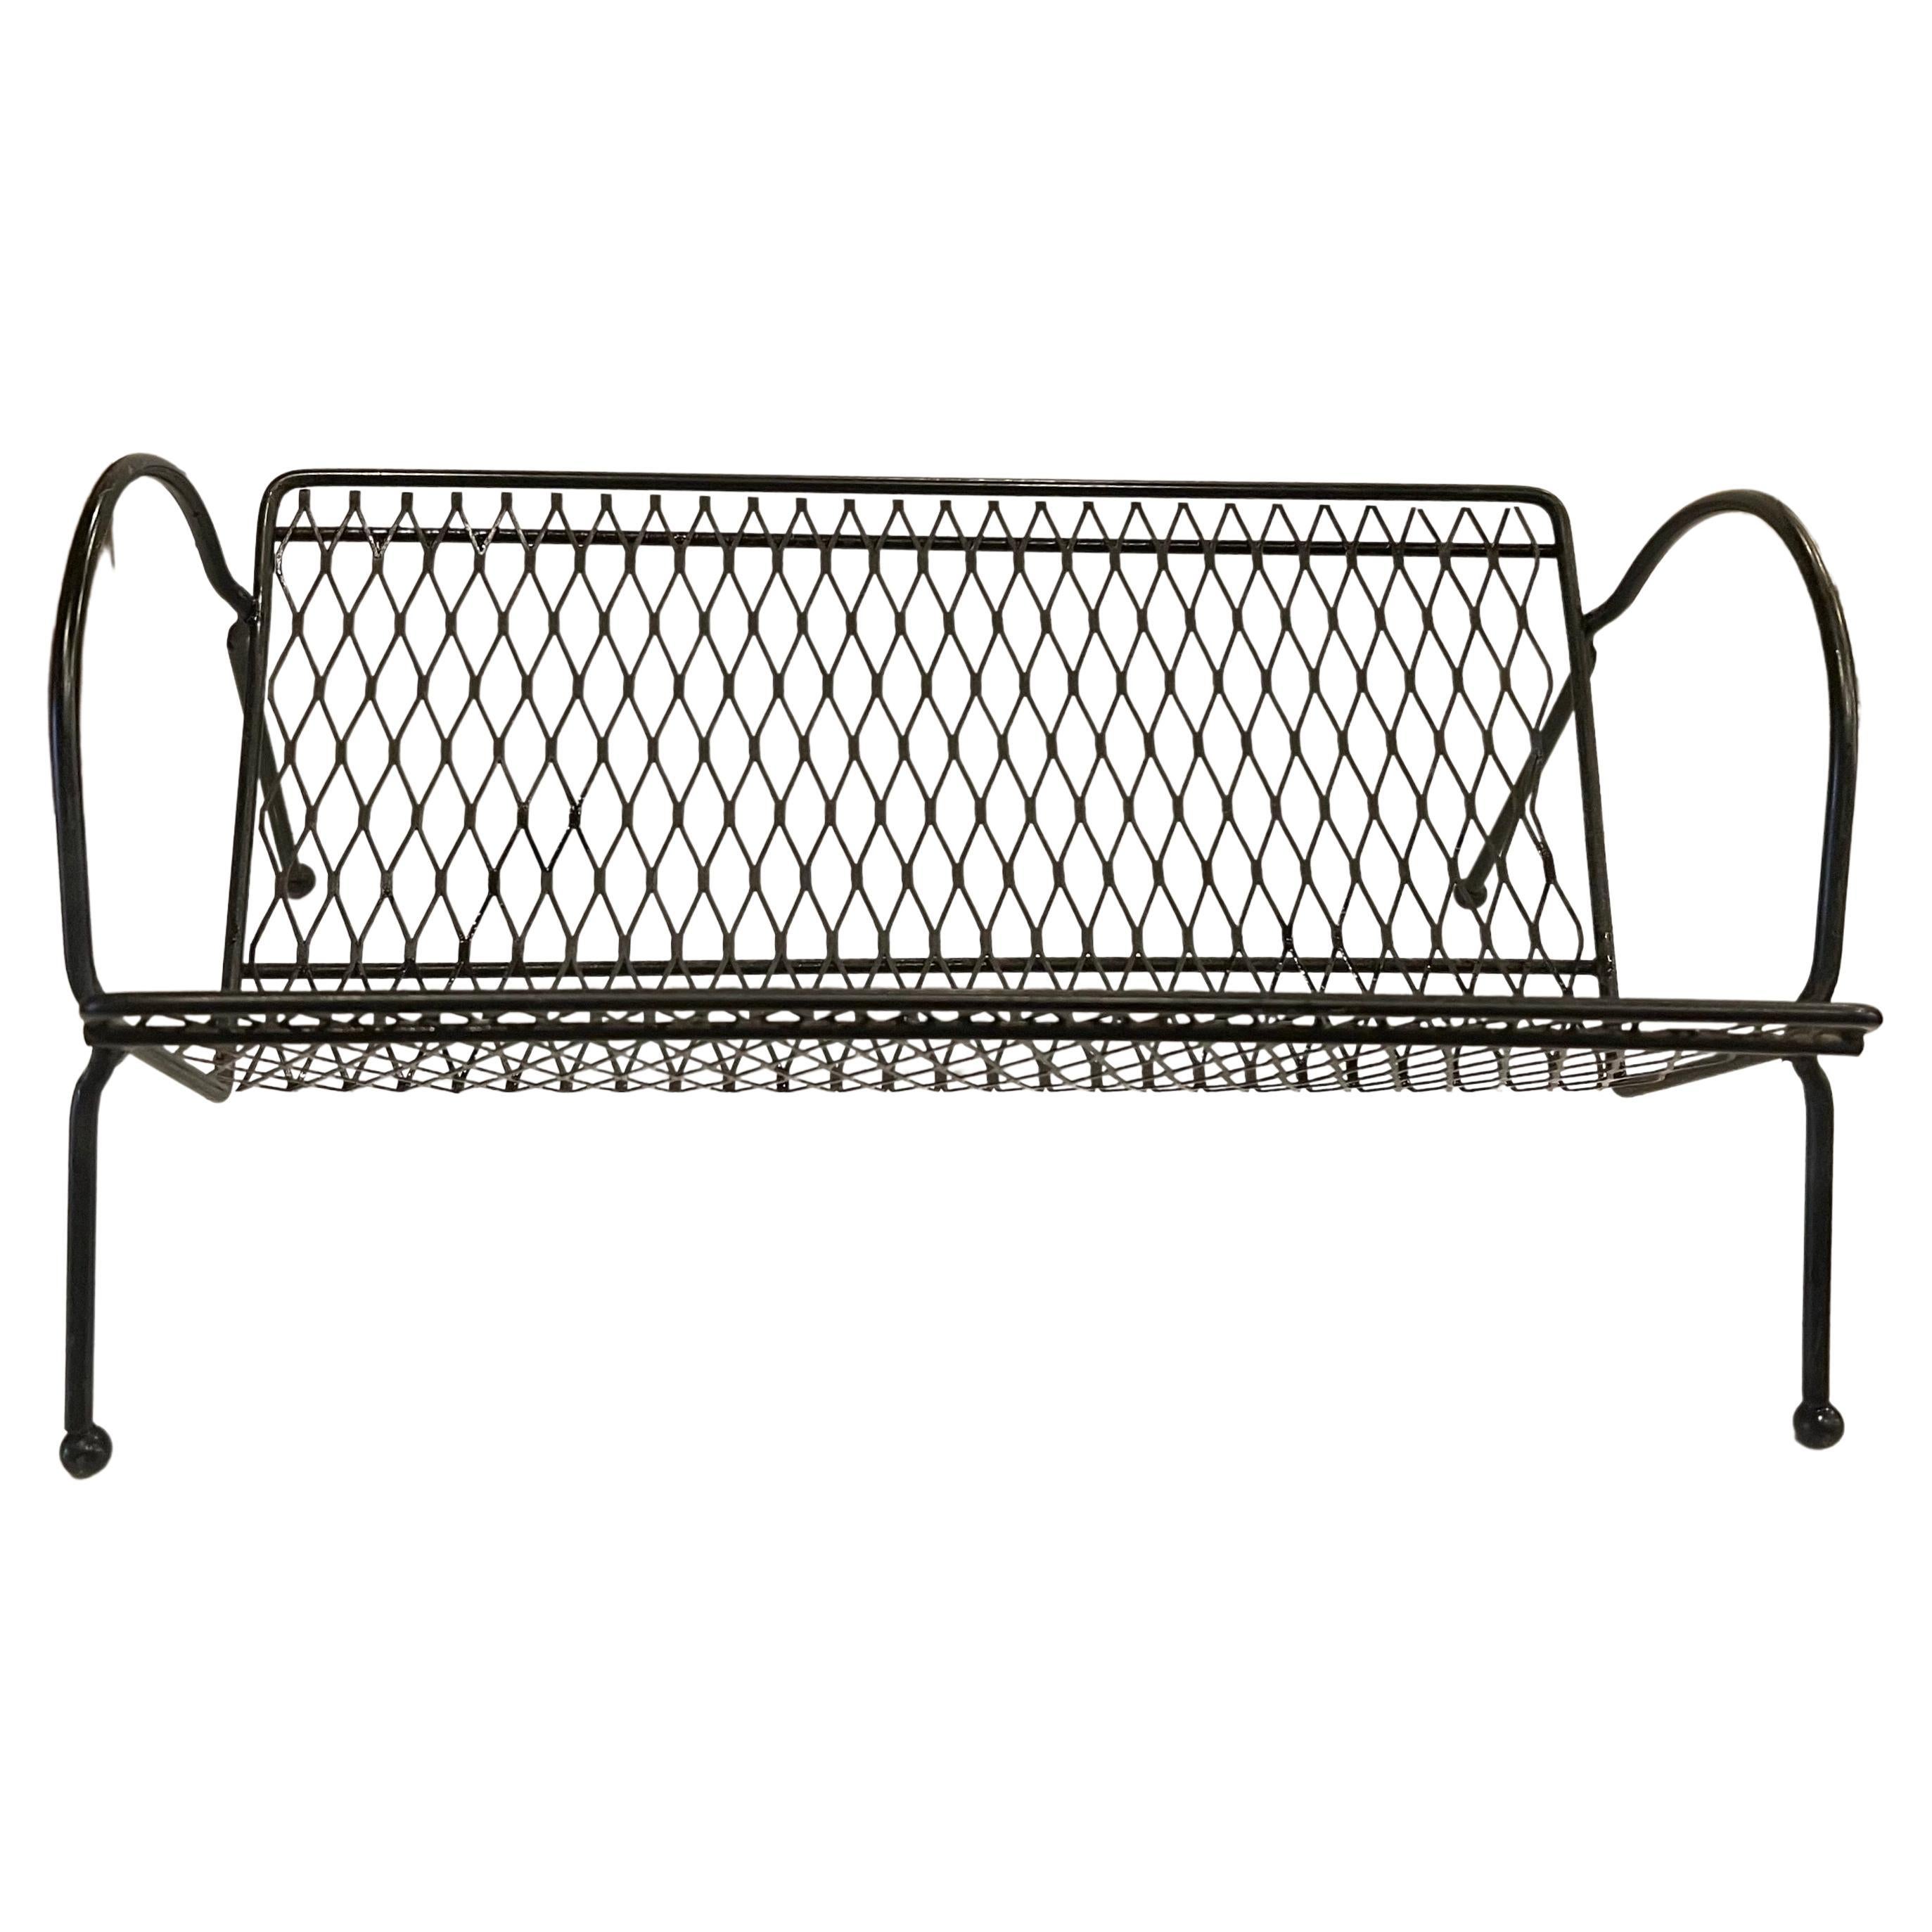 Cool and versatile metal bookstand or bookholder desk tabletop use, circa 1950s, Classic American metal mesh great condition original enameled finish.